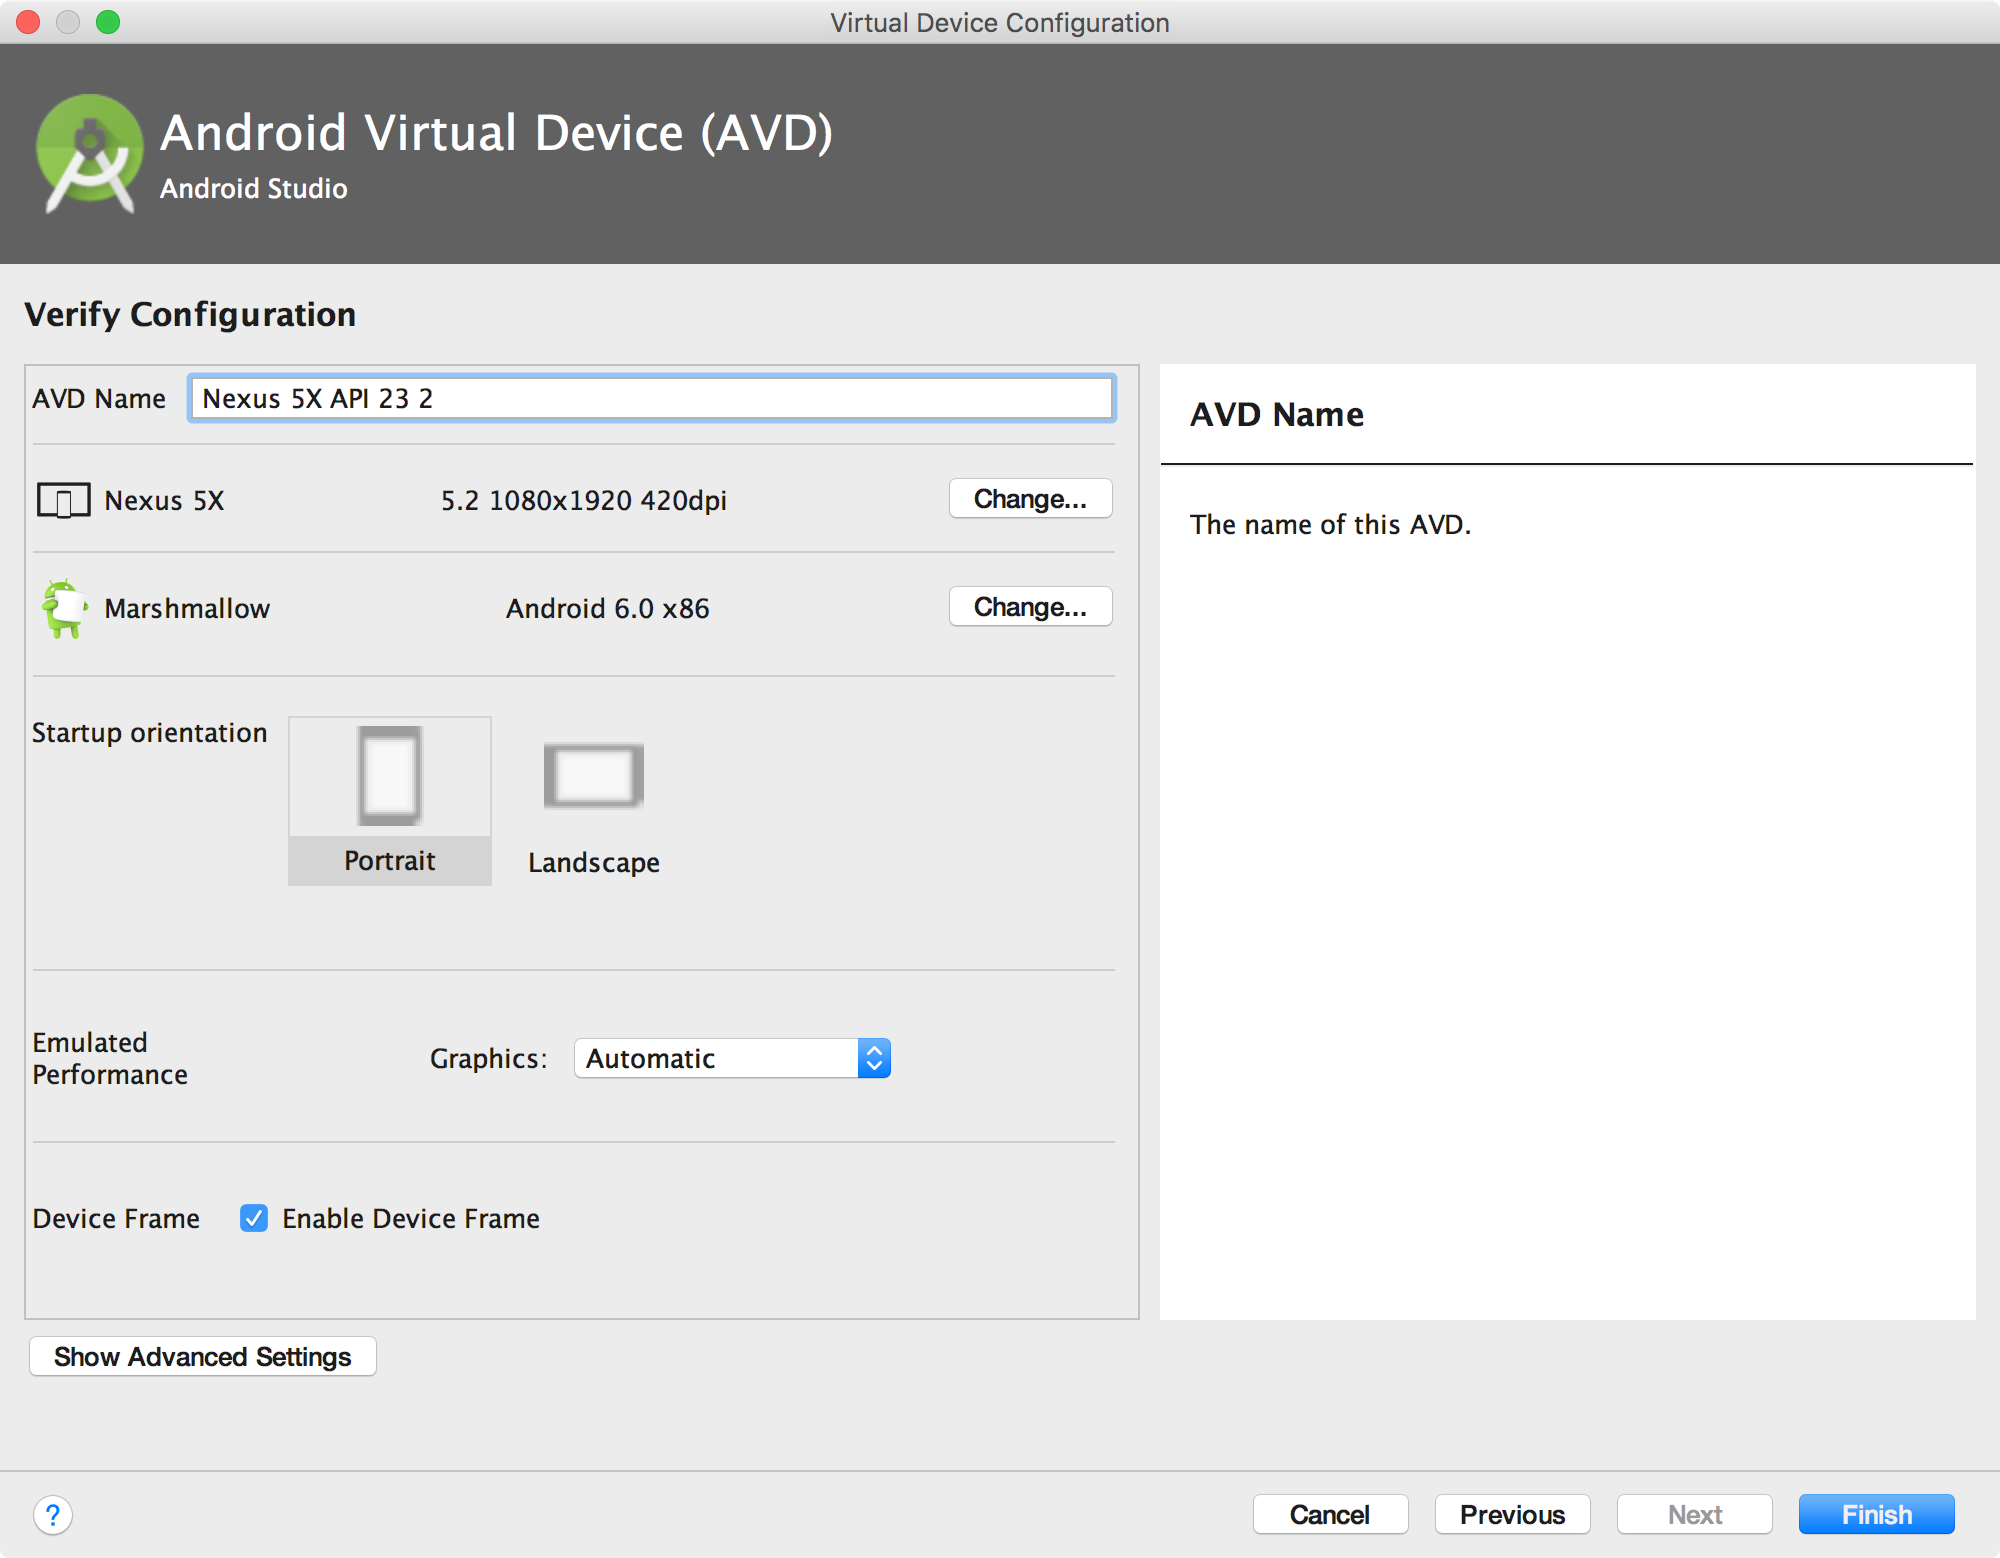 Verify Configuration page of the AVD Manager